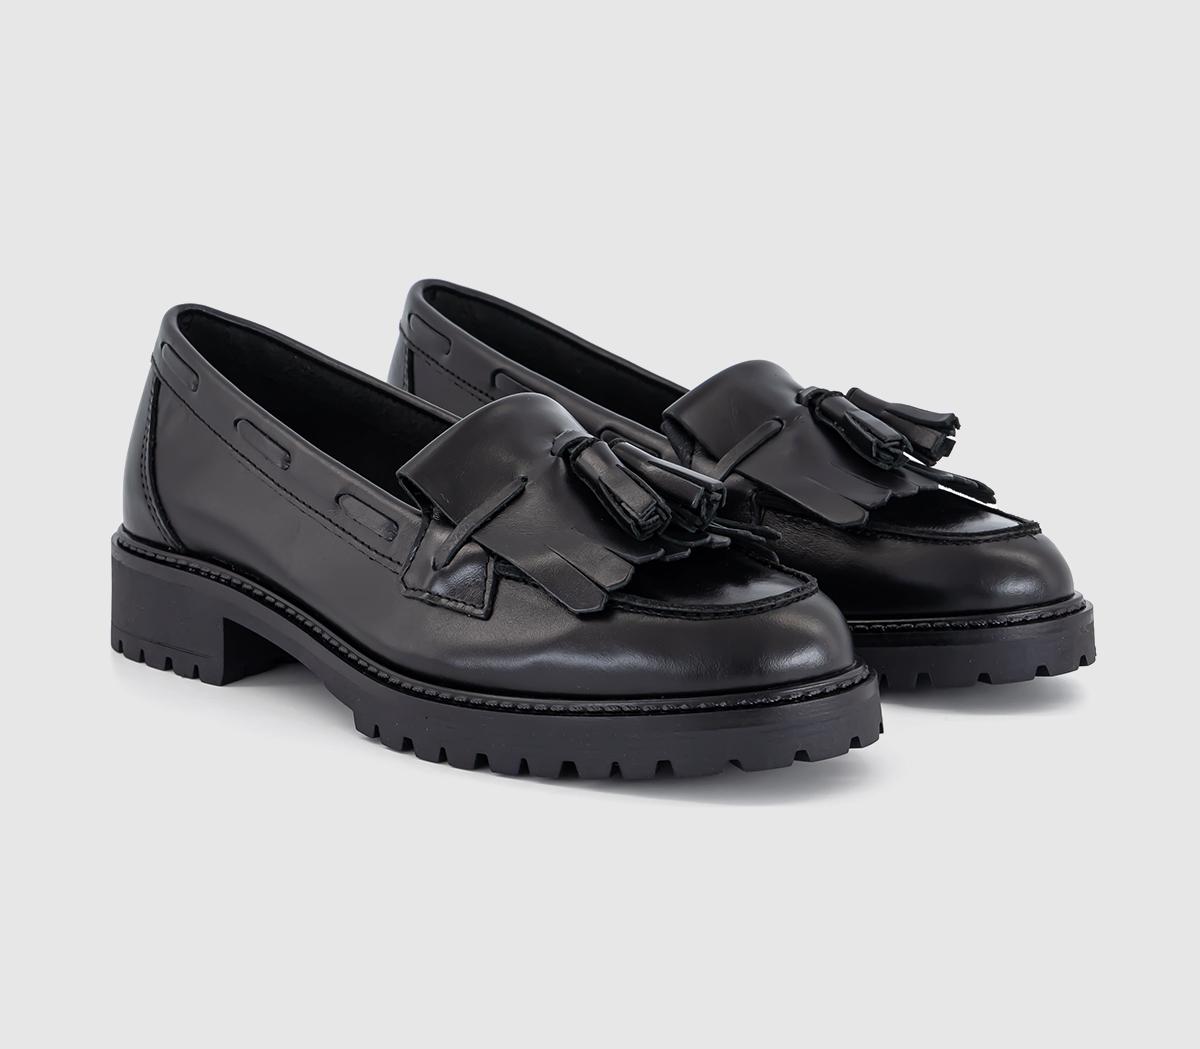 OFFICE Womens Frey Fringe Tassel Cleated Loafers Black Leather, 7